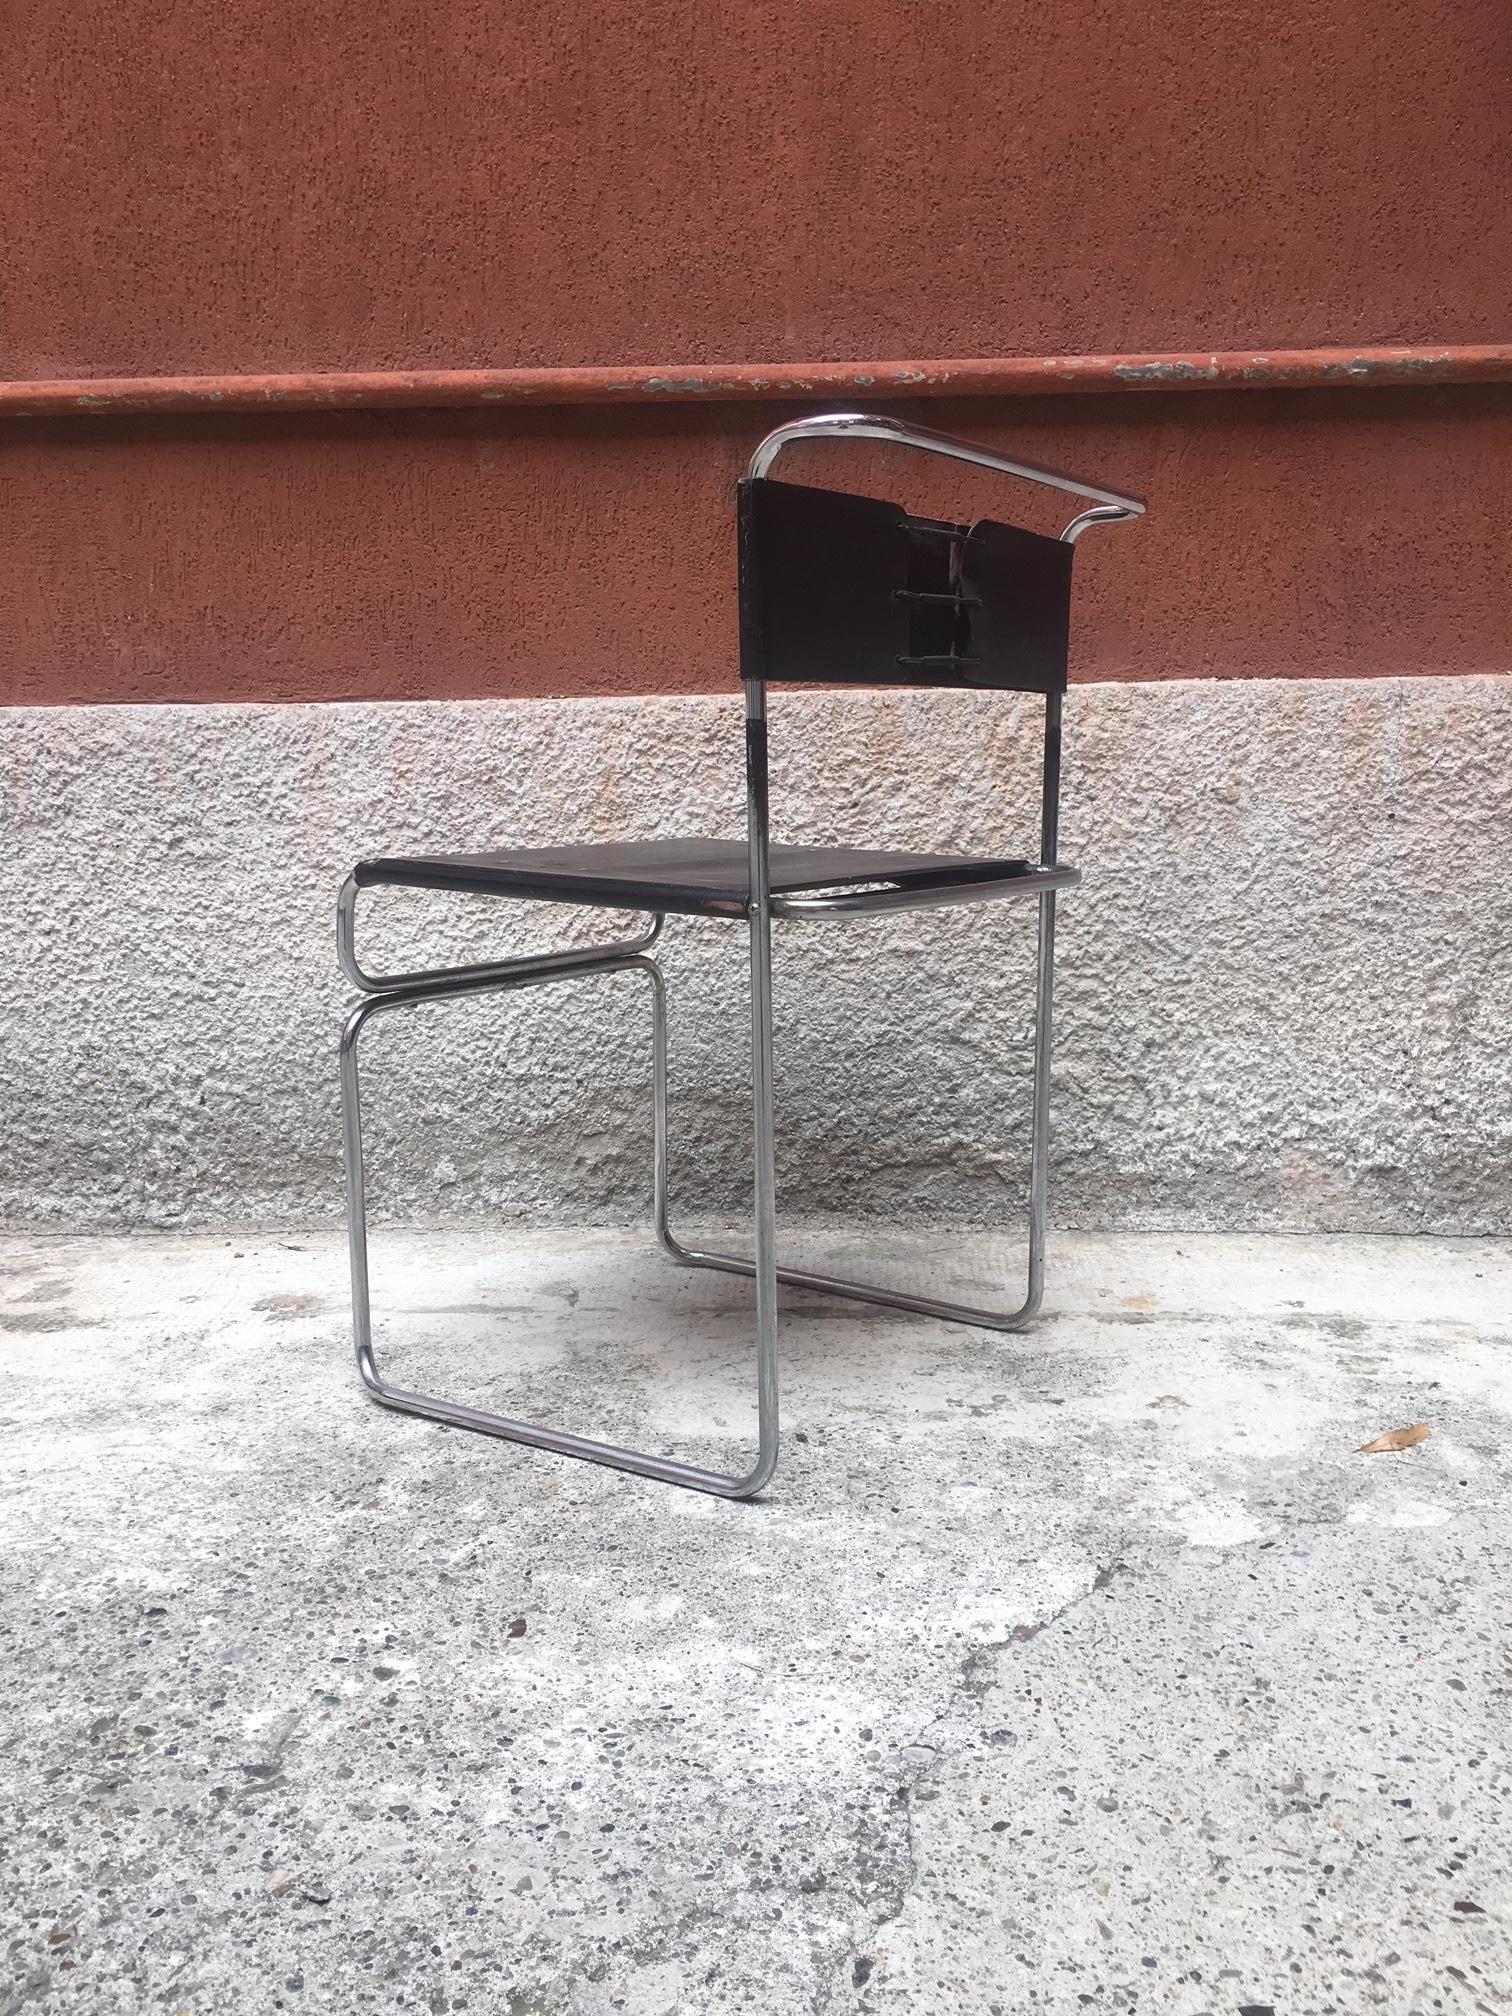 Libellula stackable chair with a chromed steel structure and back leather seat
Design by Giuseppe Carini produced by Planula, 1970
Vintage condition and beautiful vintage leather
Stylish in a dining room and comfortable in every corner of the